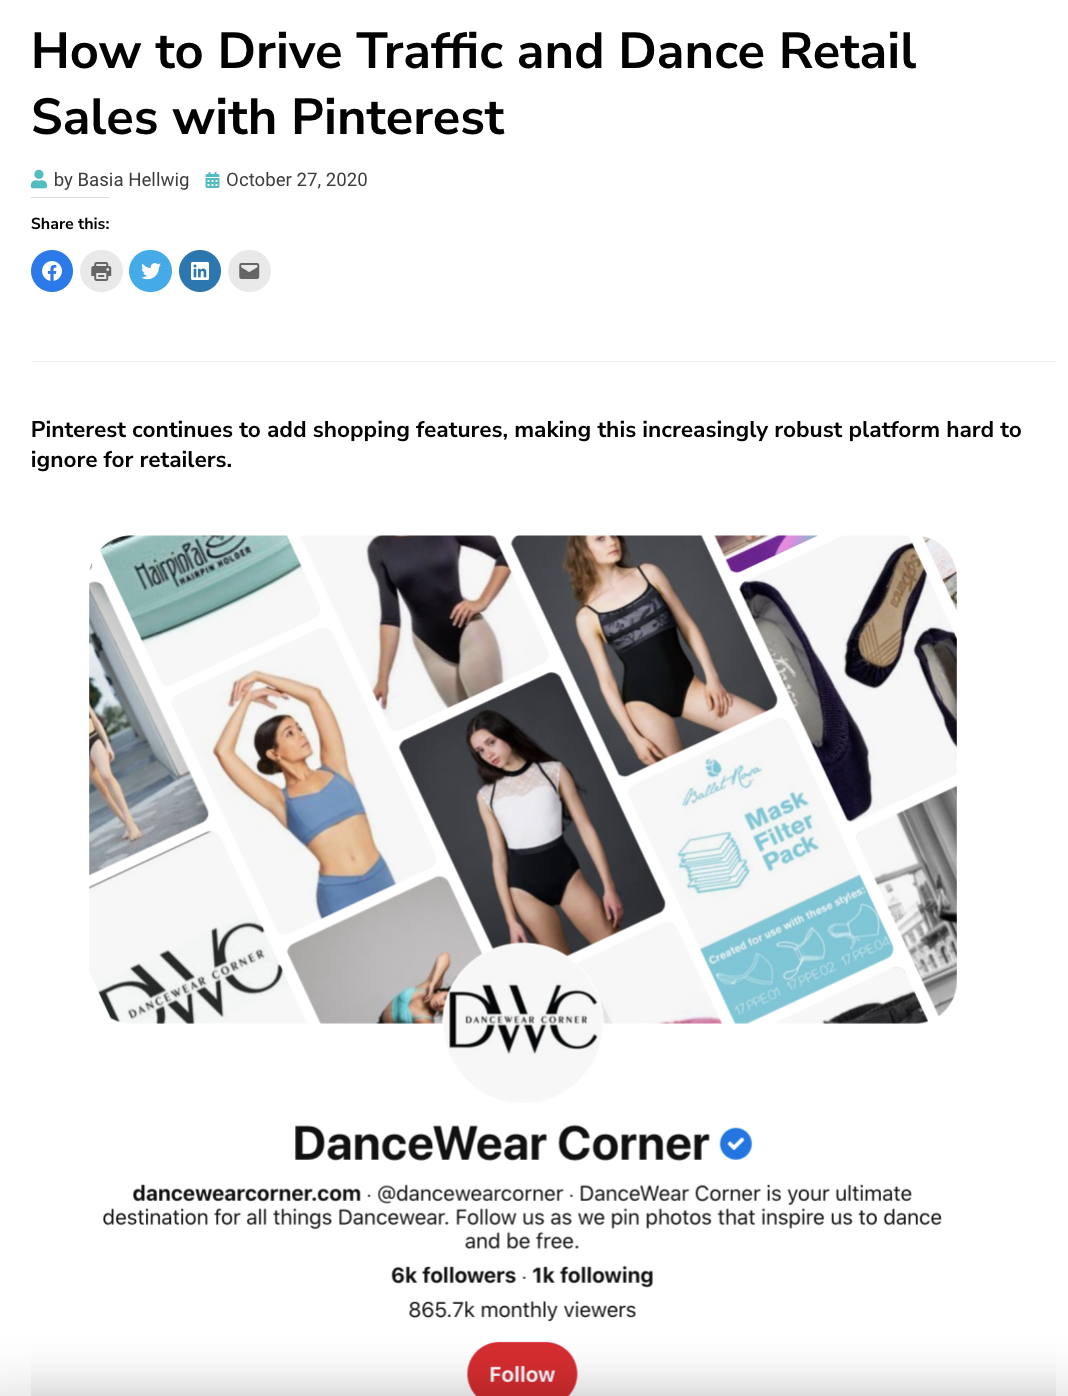 How to Drive Traffic and Dance Retail Sales with Pinterest